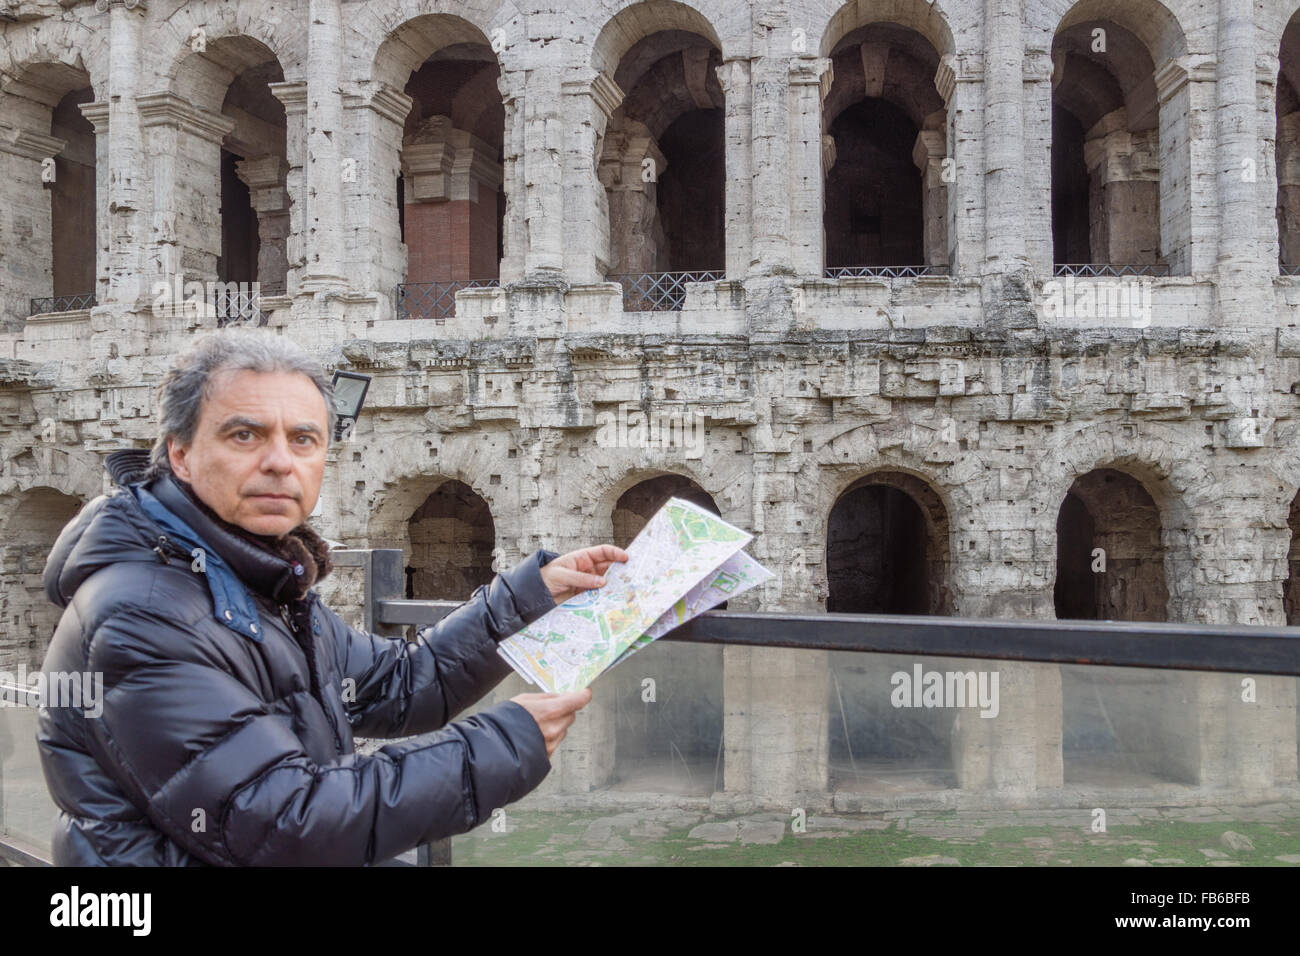 middle-aged man looks at a map near walls and arches of Roman amphitheater, the Coliseum in Rome, Italy Stock Photo